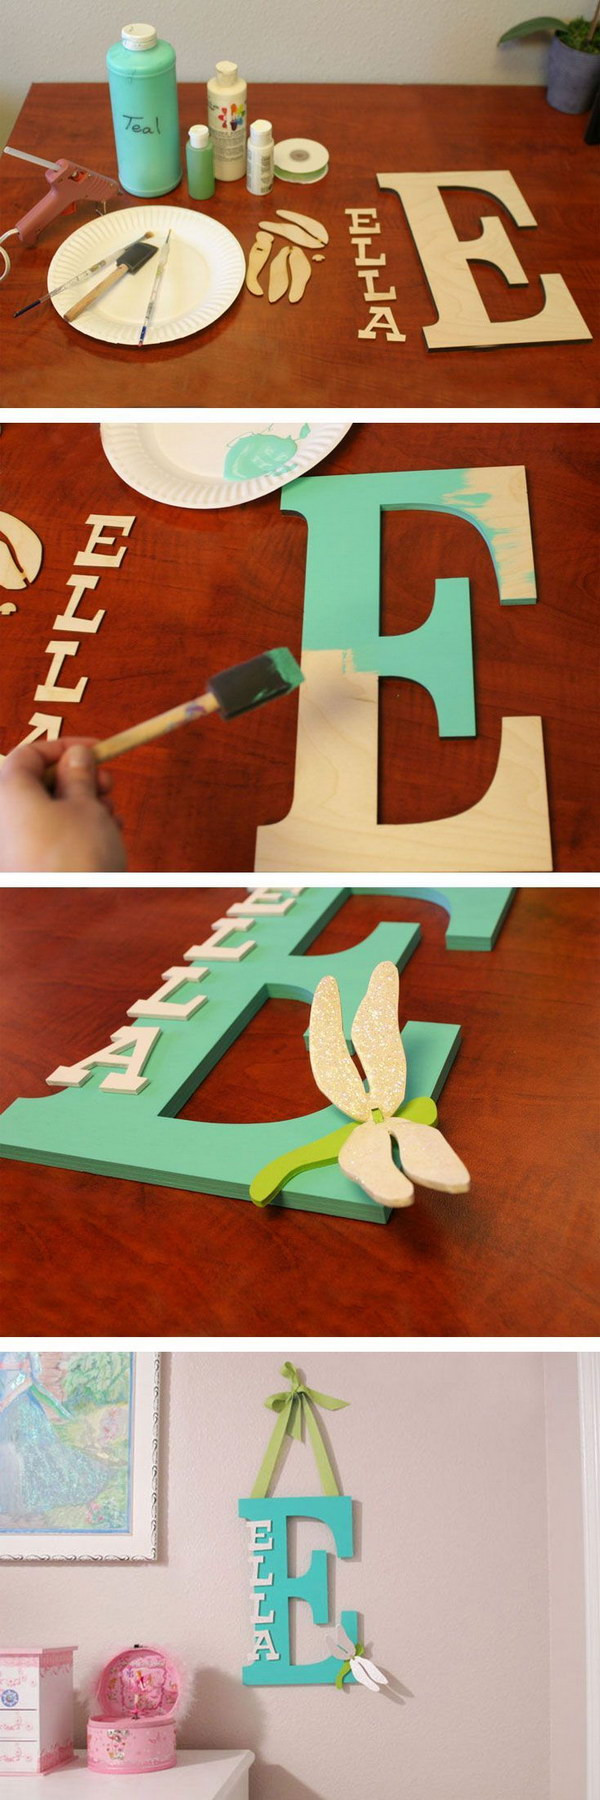 Wood Letter DIY
 45 Awesome DIY Ideas for Making Your Own Decorative